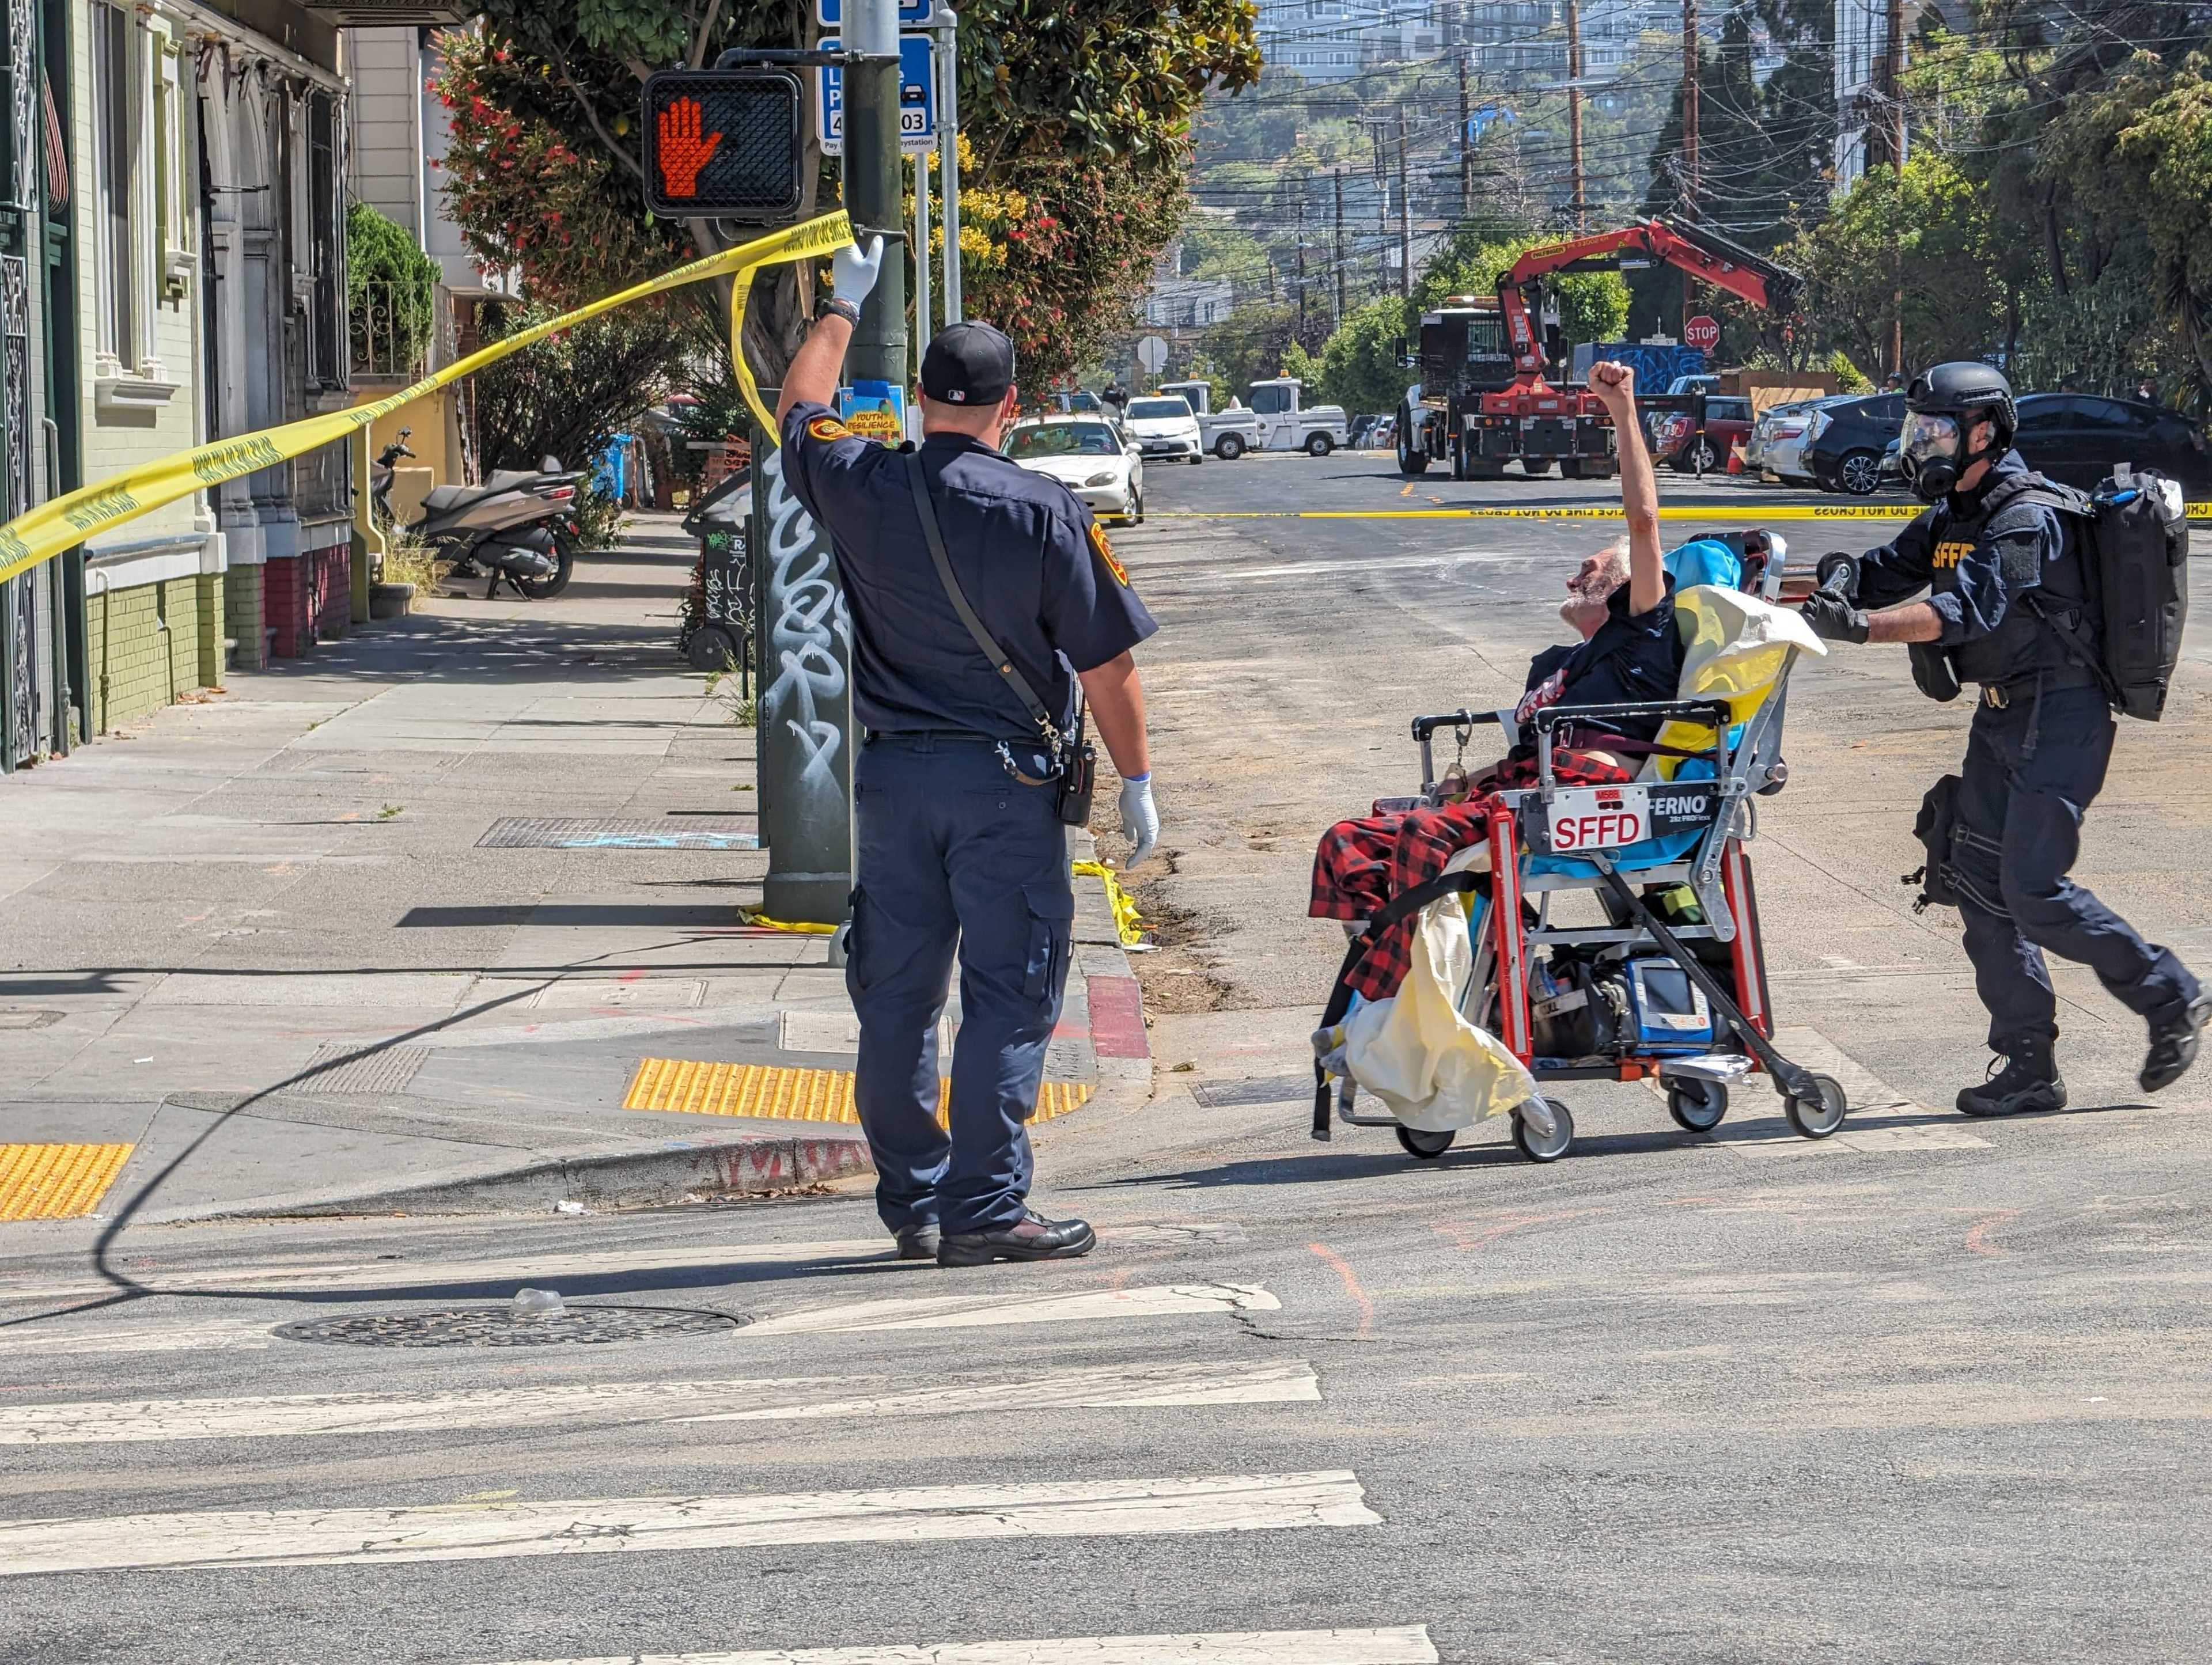 A person in a wheelchair is escorted by two officers, one holding a roll of caution tape. The street is cordoned off, with a "Do Not Walk" signal visible.